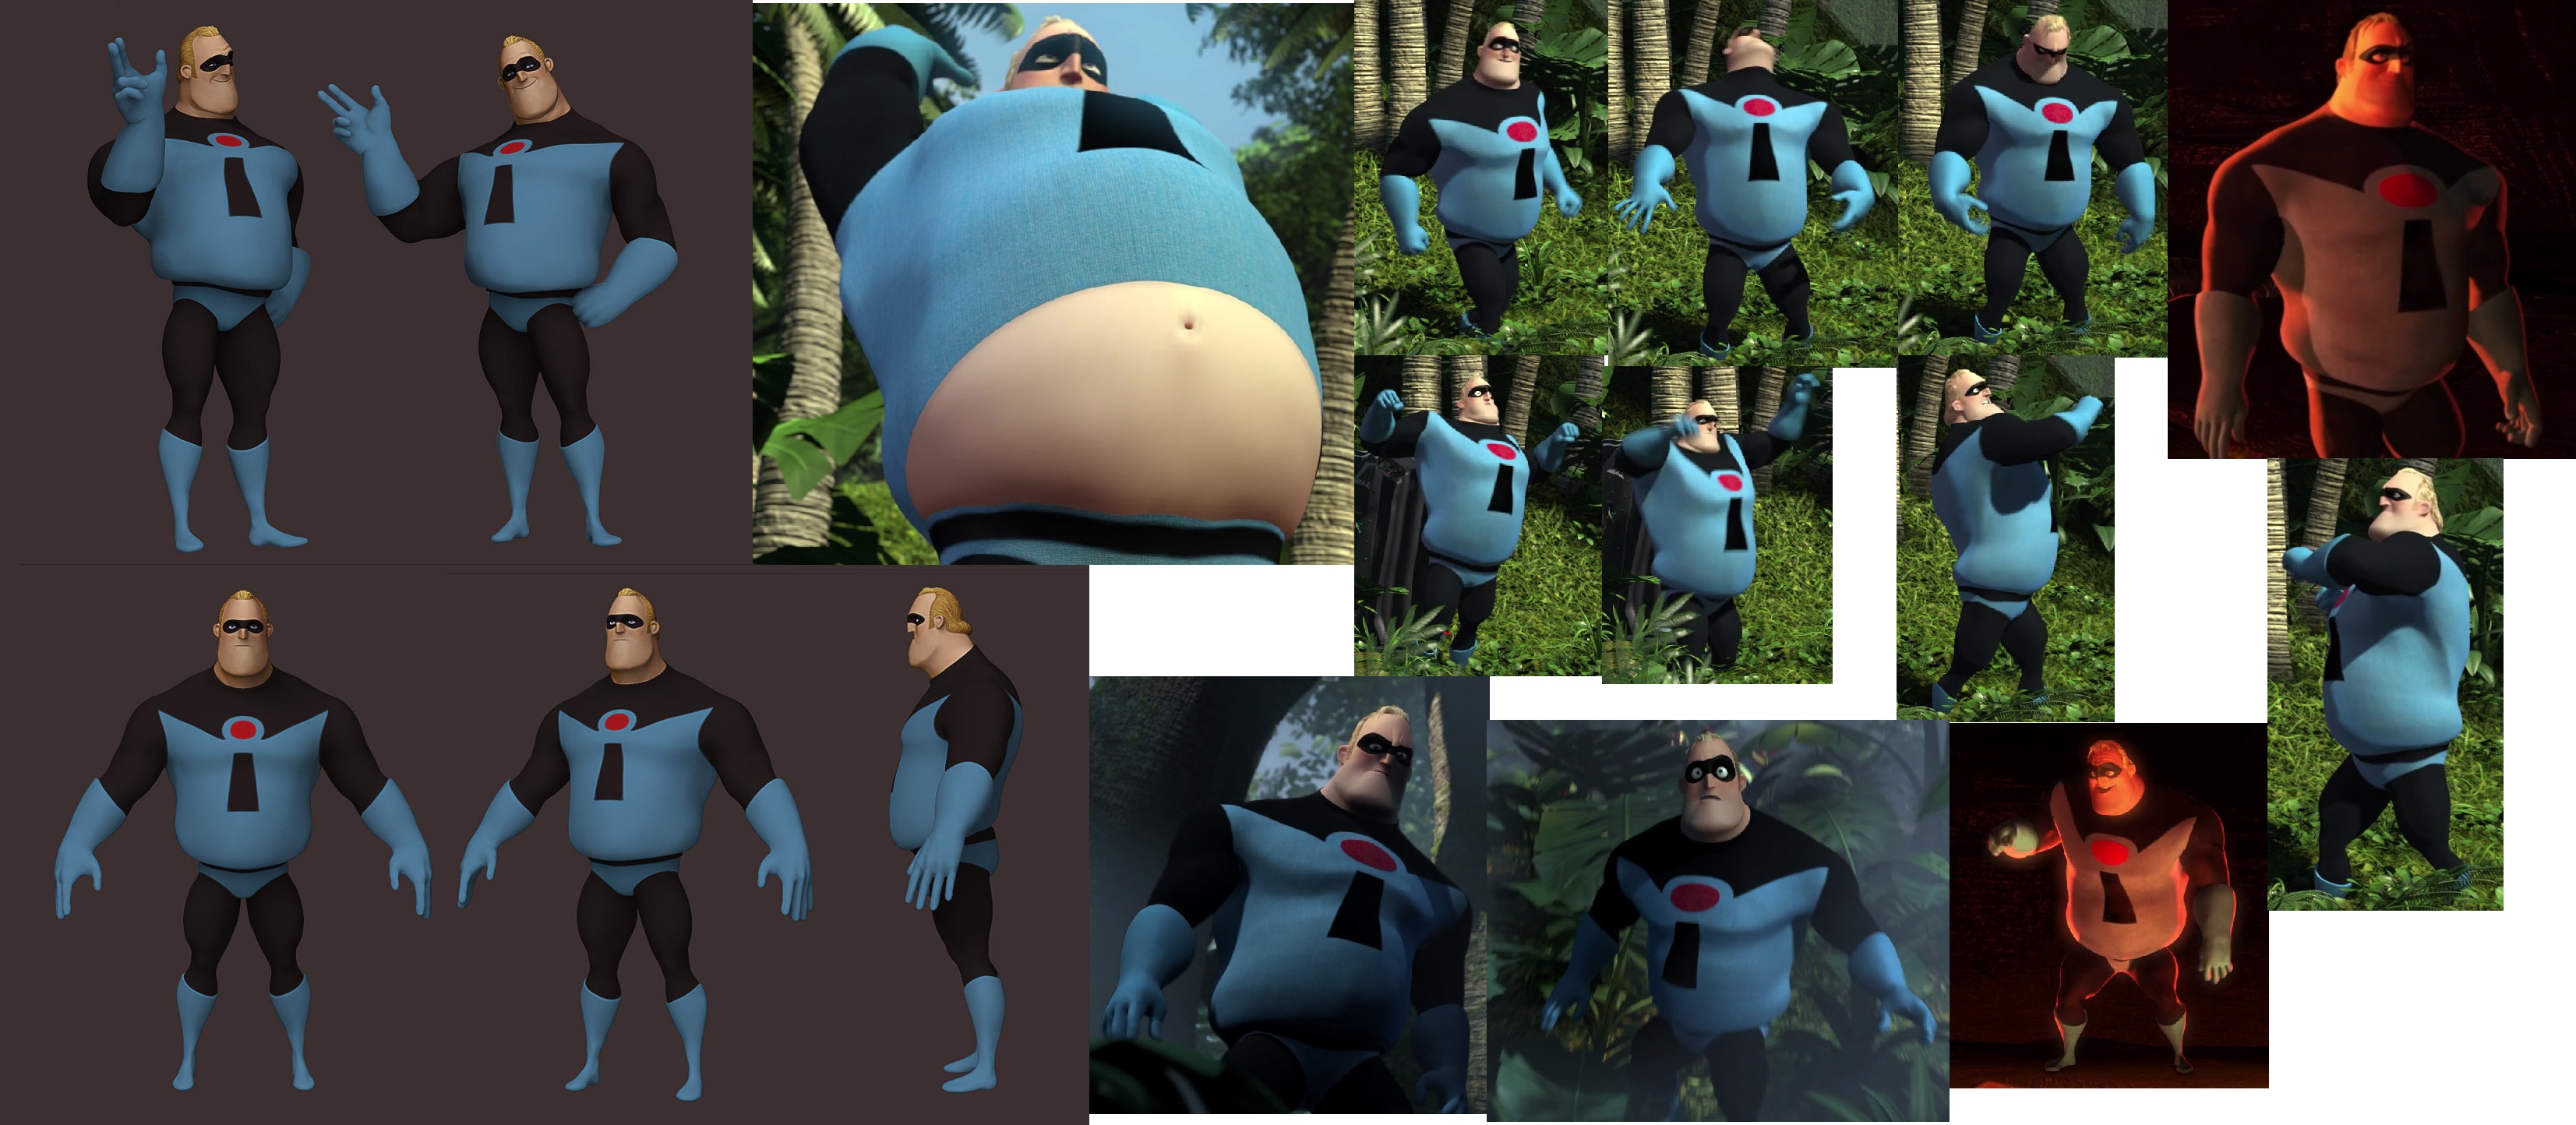 Mr. Incredible Fat in Retro Suit reference.jpg.